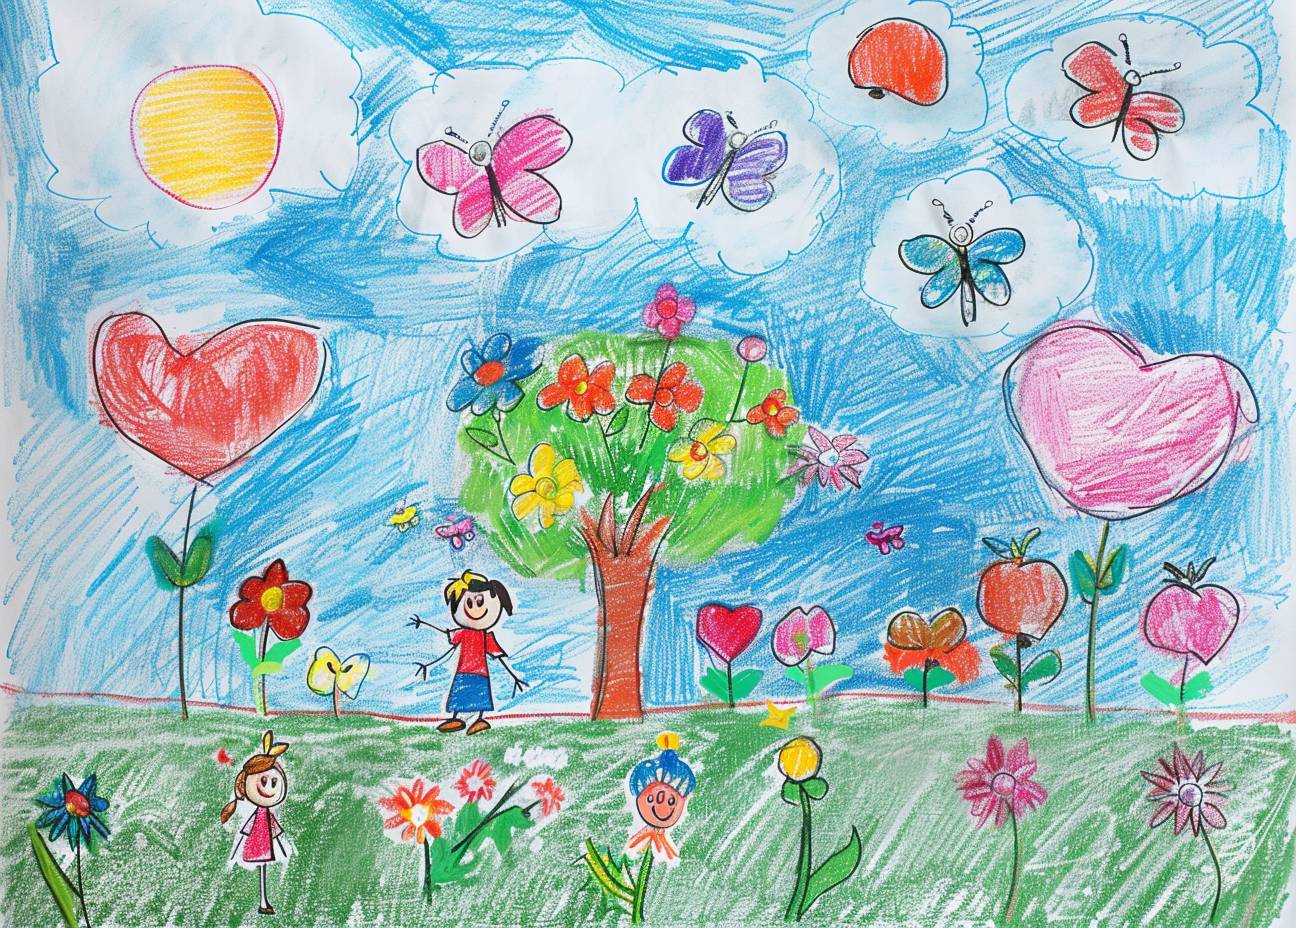 Naive children's drawing with colored chalk on white paper, made by hand by a fat child in the style of primitive art, depicts a magical sky with many flowers and butterflies, a magical image for a children's book, with a sky background, flat color background, simple lines, no shading, and cartoonish cuteness, with an apple tree behind them.